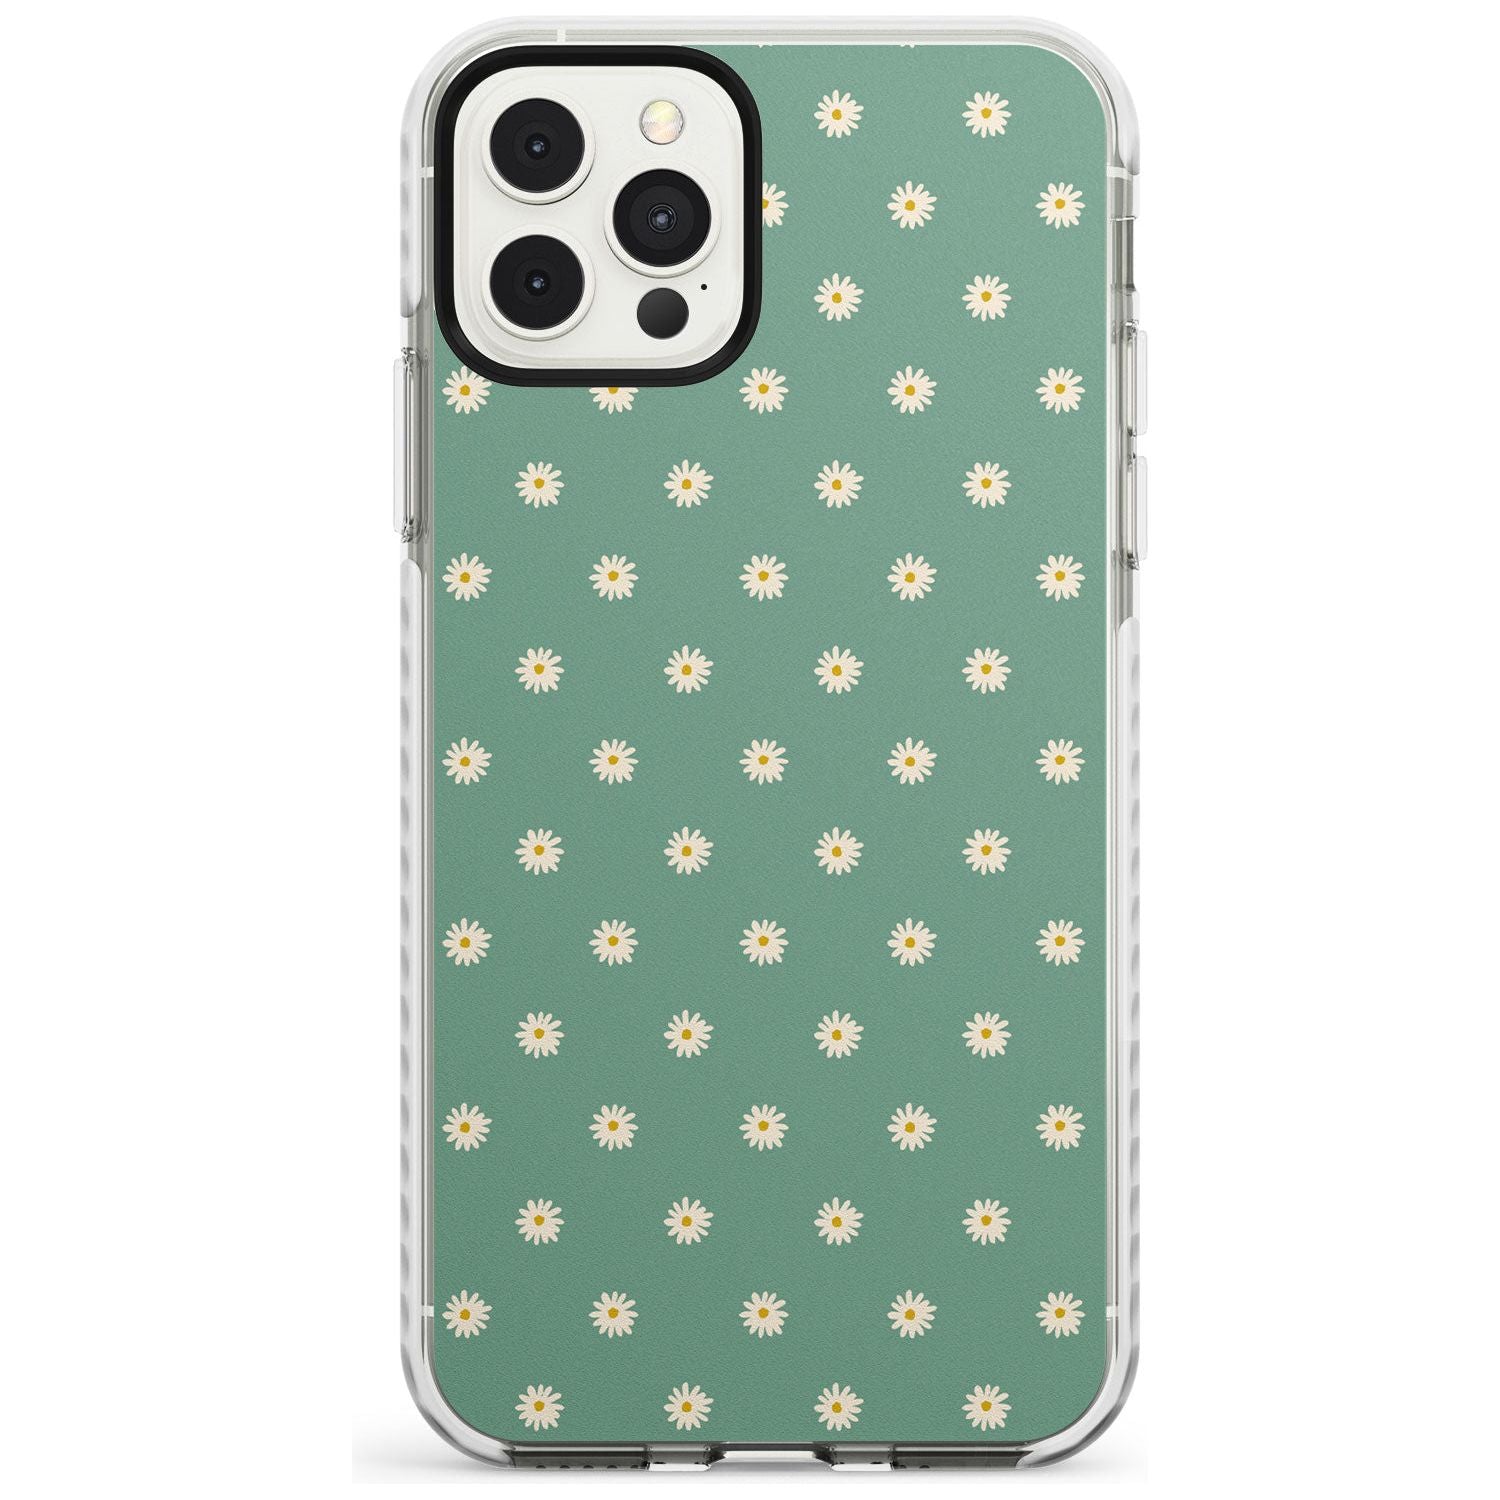 Daisy Pattern - Teal Cute Floral Daisy Design Slim TPU Phone Case for iPhone 11 Pro Max